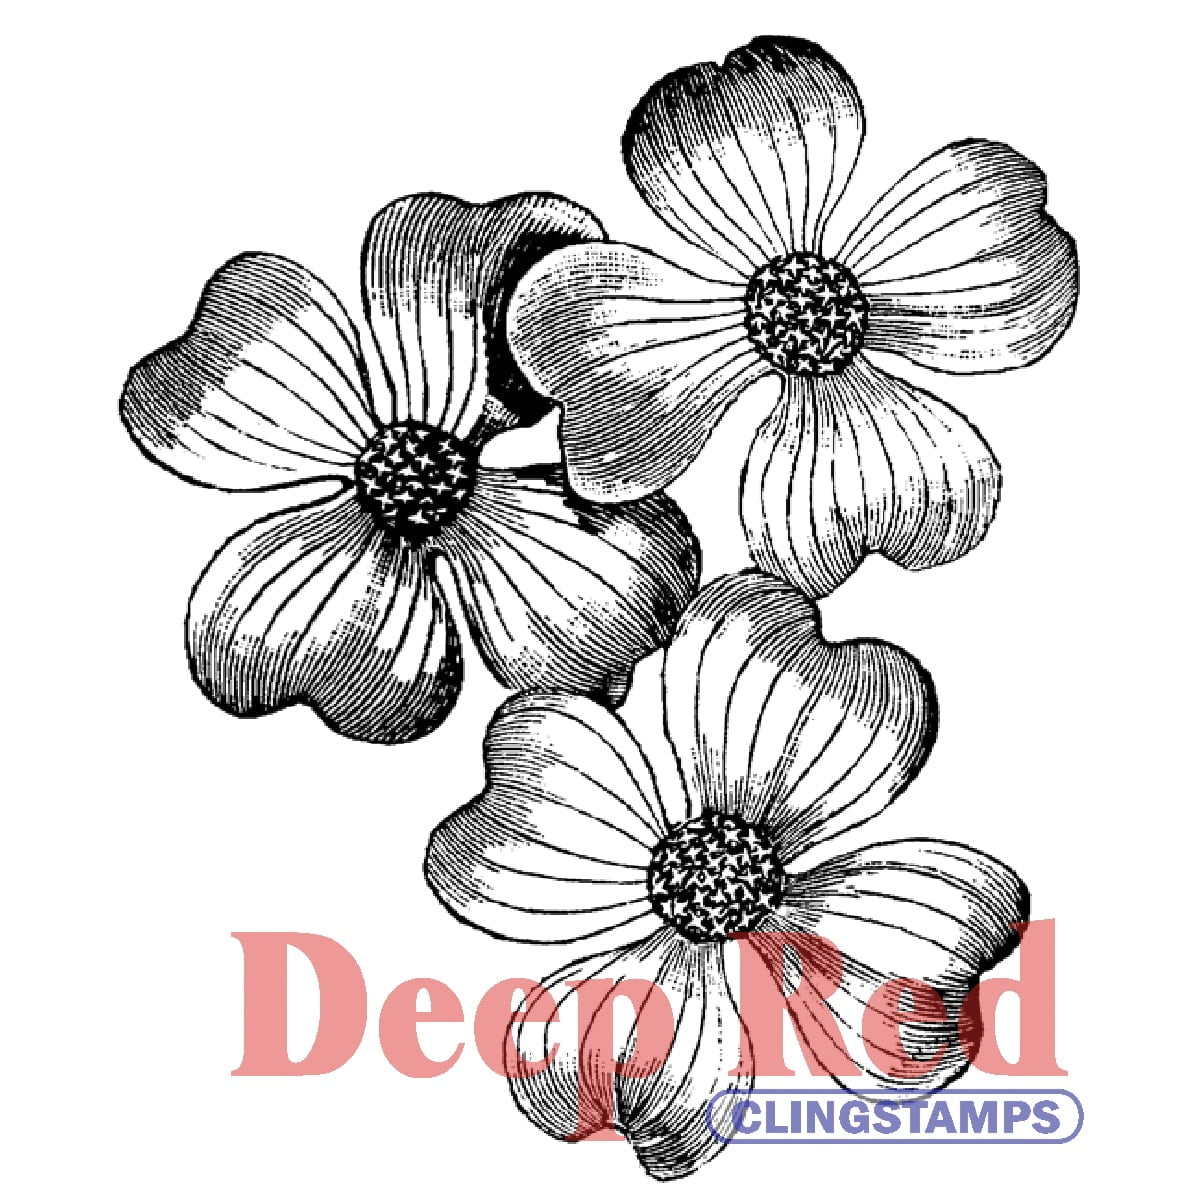 Deep Red Stamps Quilt Flower Motif Rubber Cling Stamp 